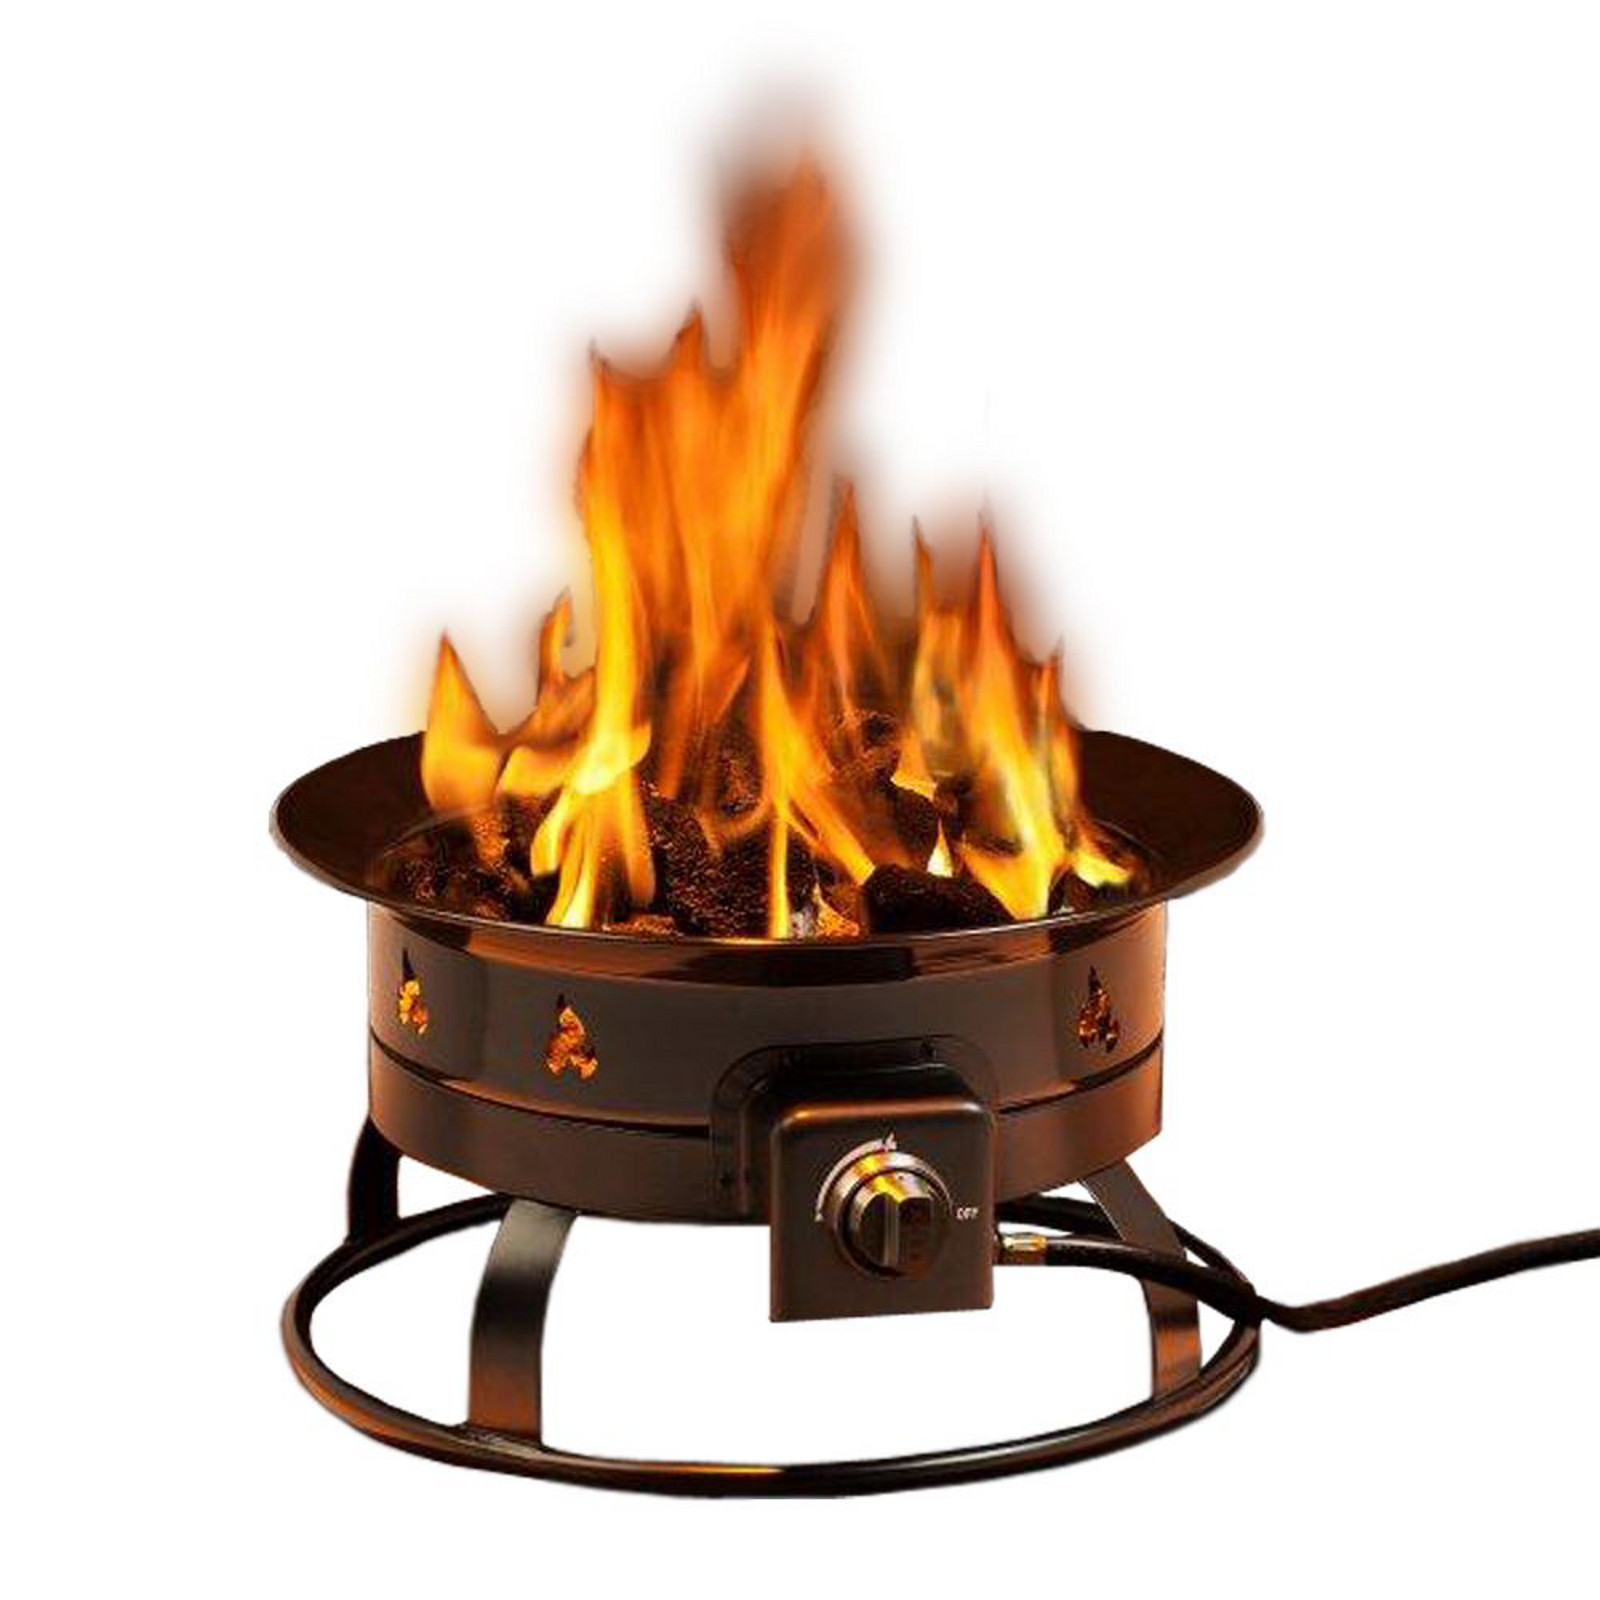 Heininger Portable Propane Outdoor Fire, Sears Fire Pit